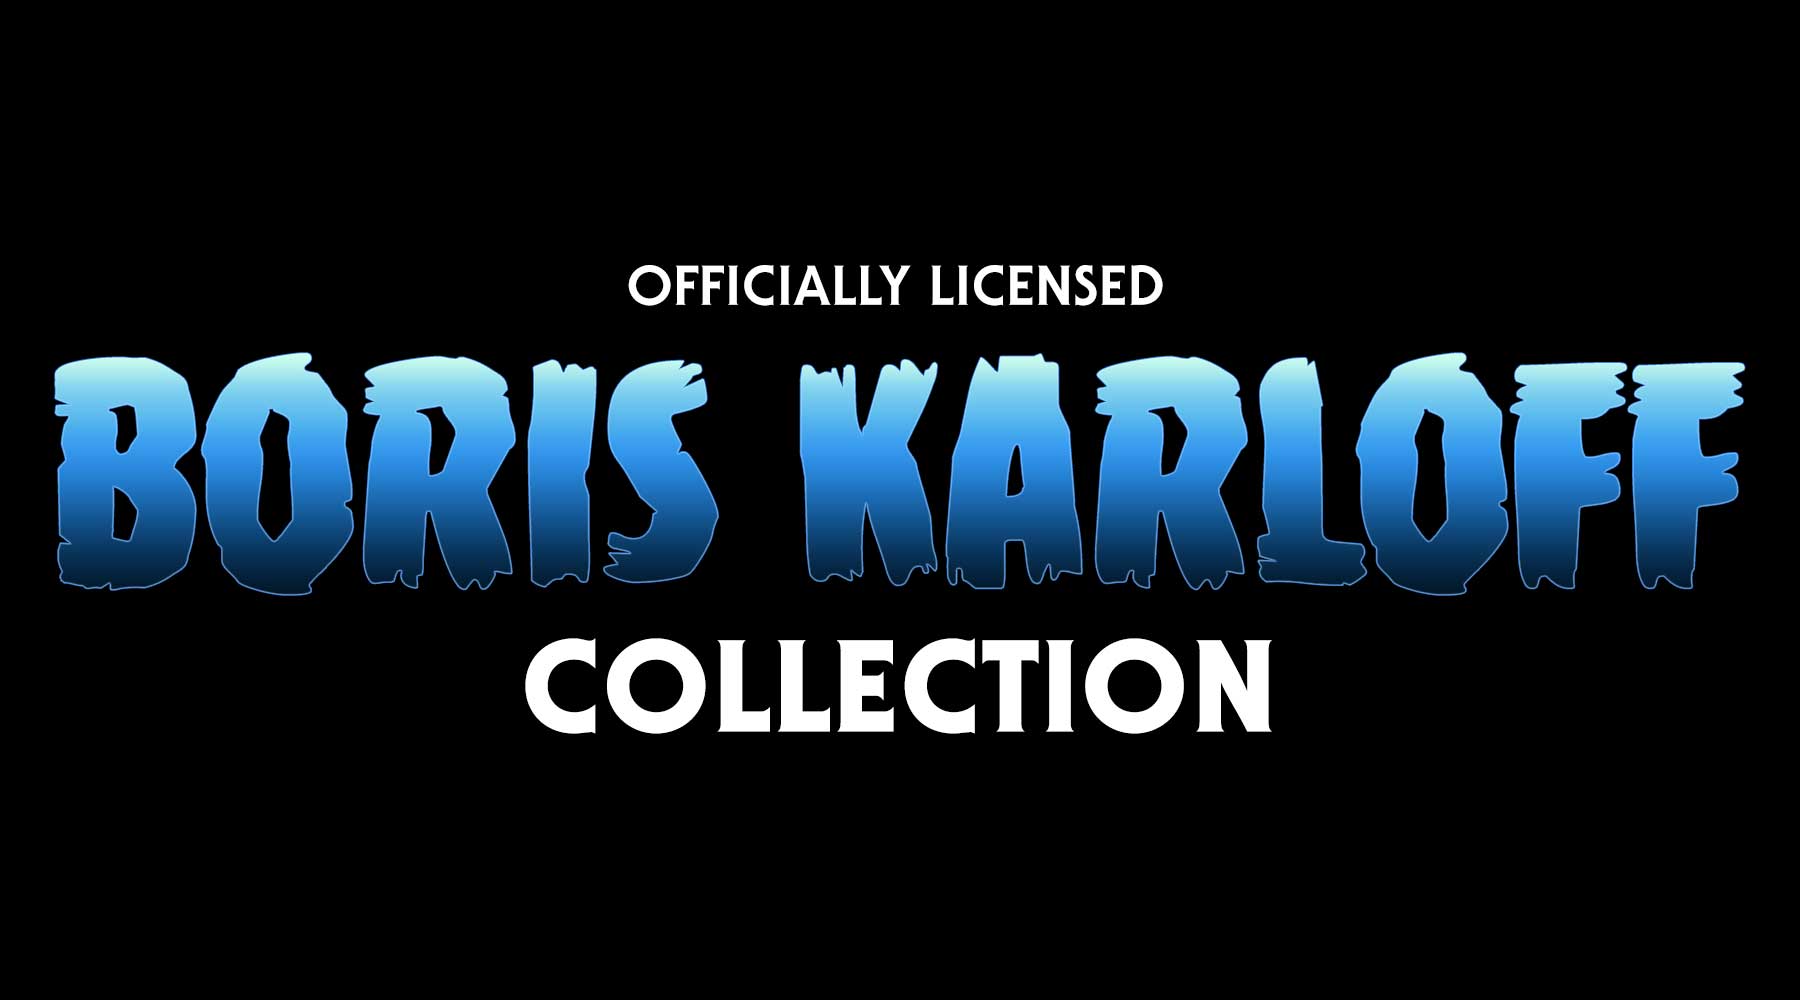 Officially Licensed Boris Karloff Collection